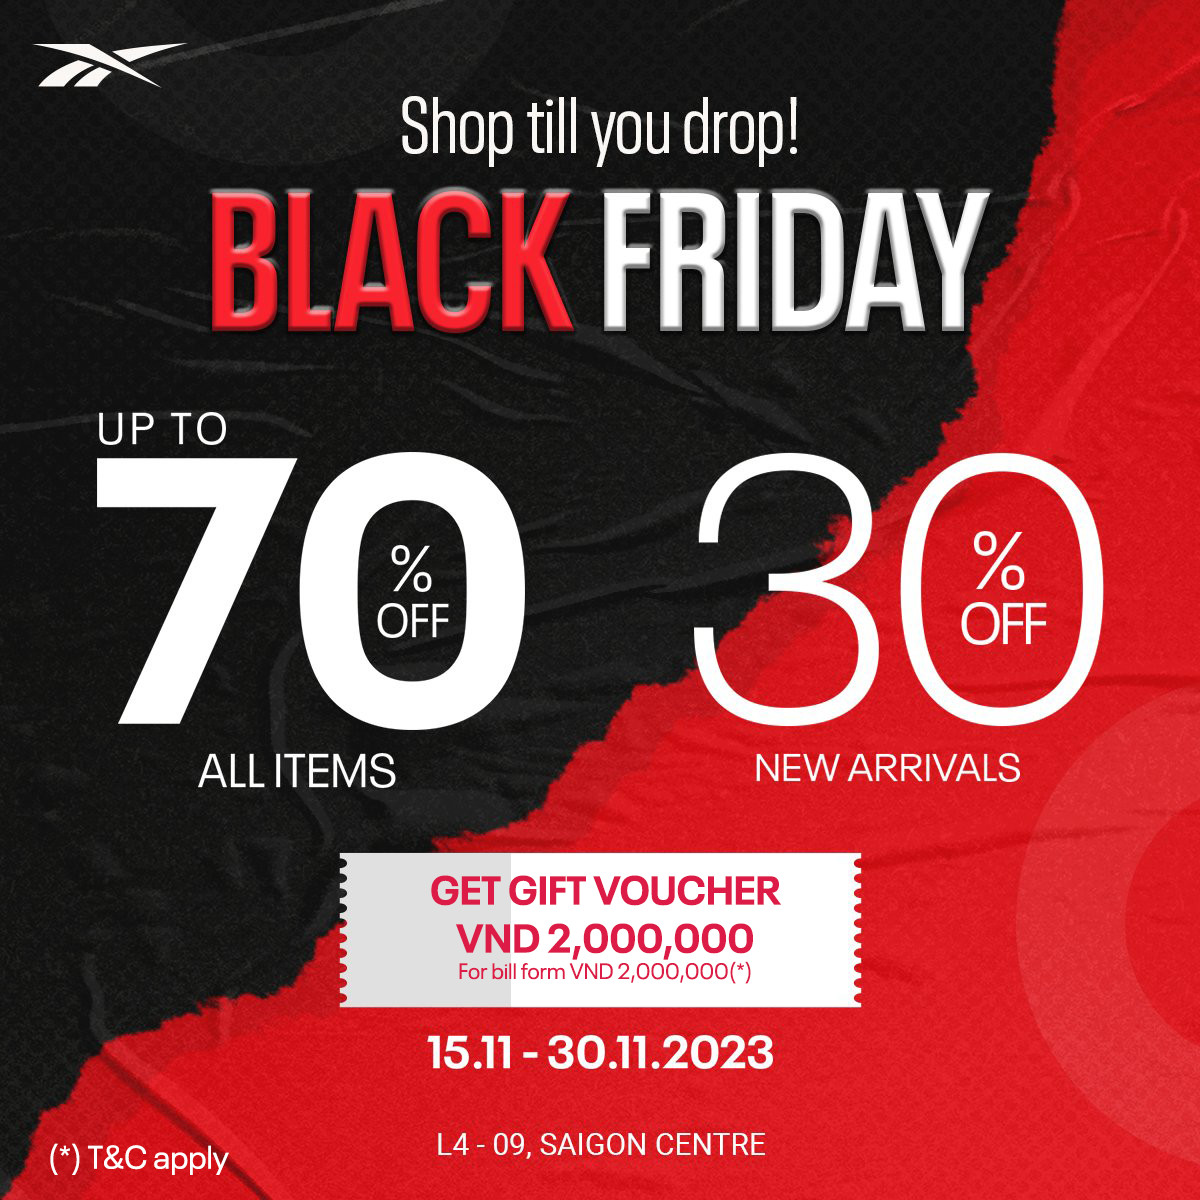 REEBOK - BLACK FRIDAY MAGIC - UP TO 70% FOR ALL ITEMS & MORE